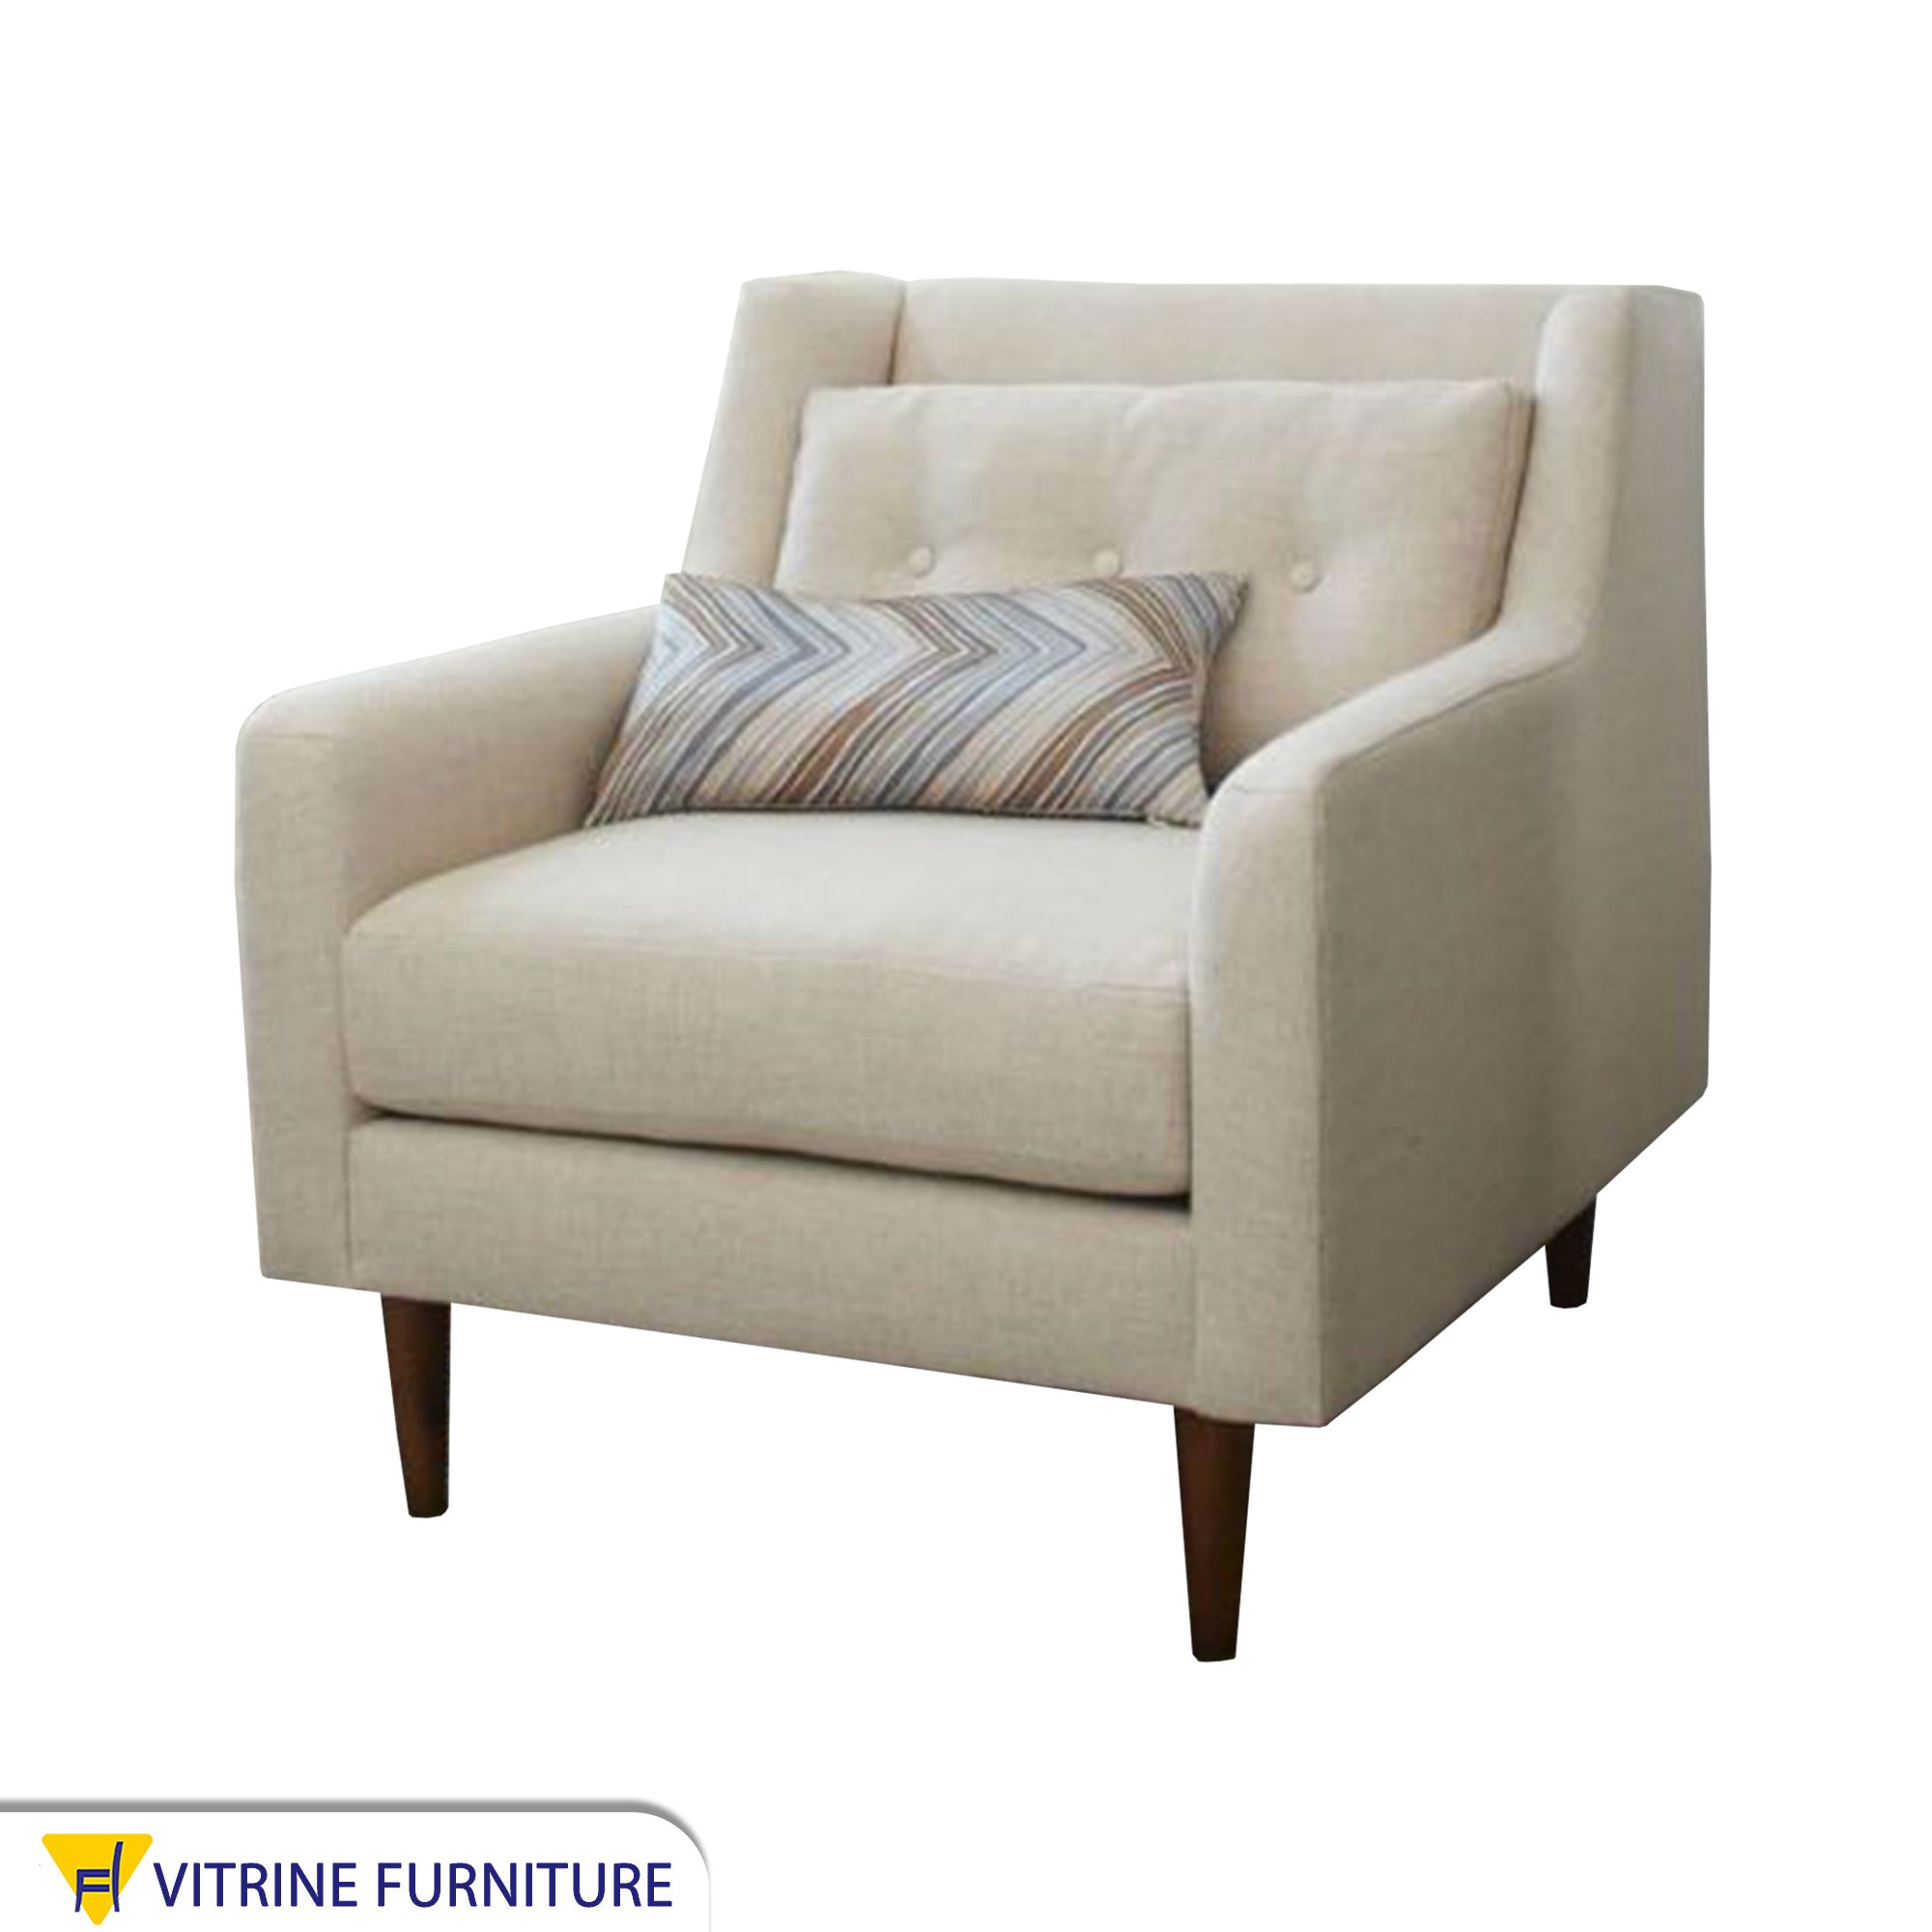 Beige footstool with thin armrests